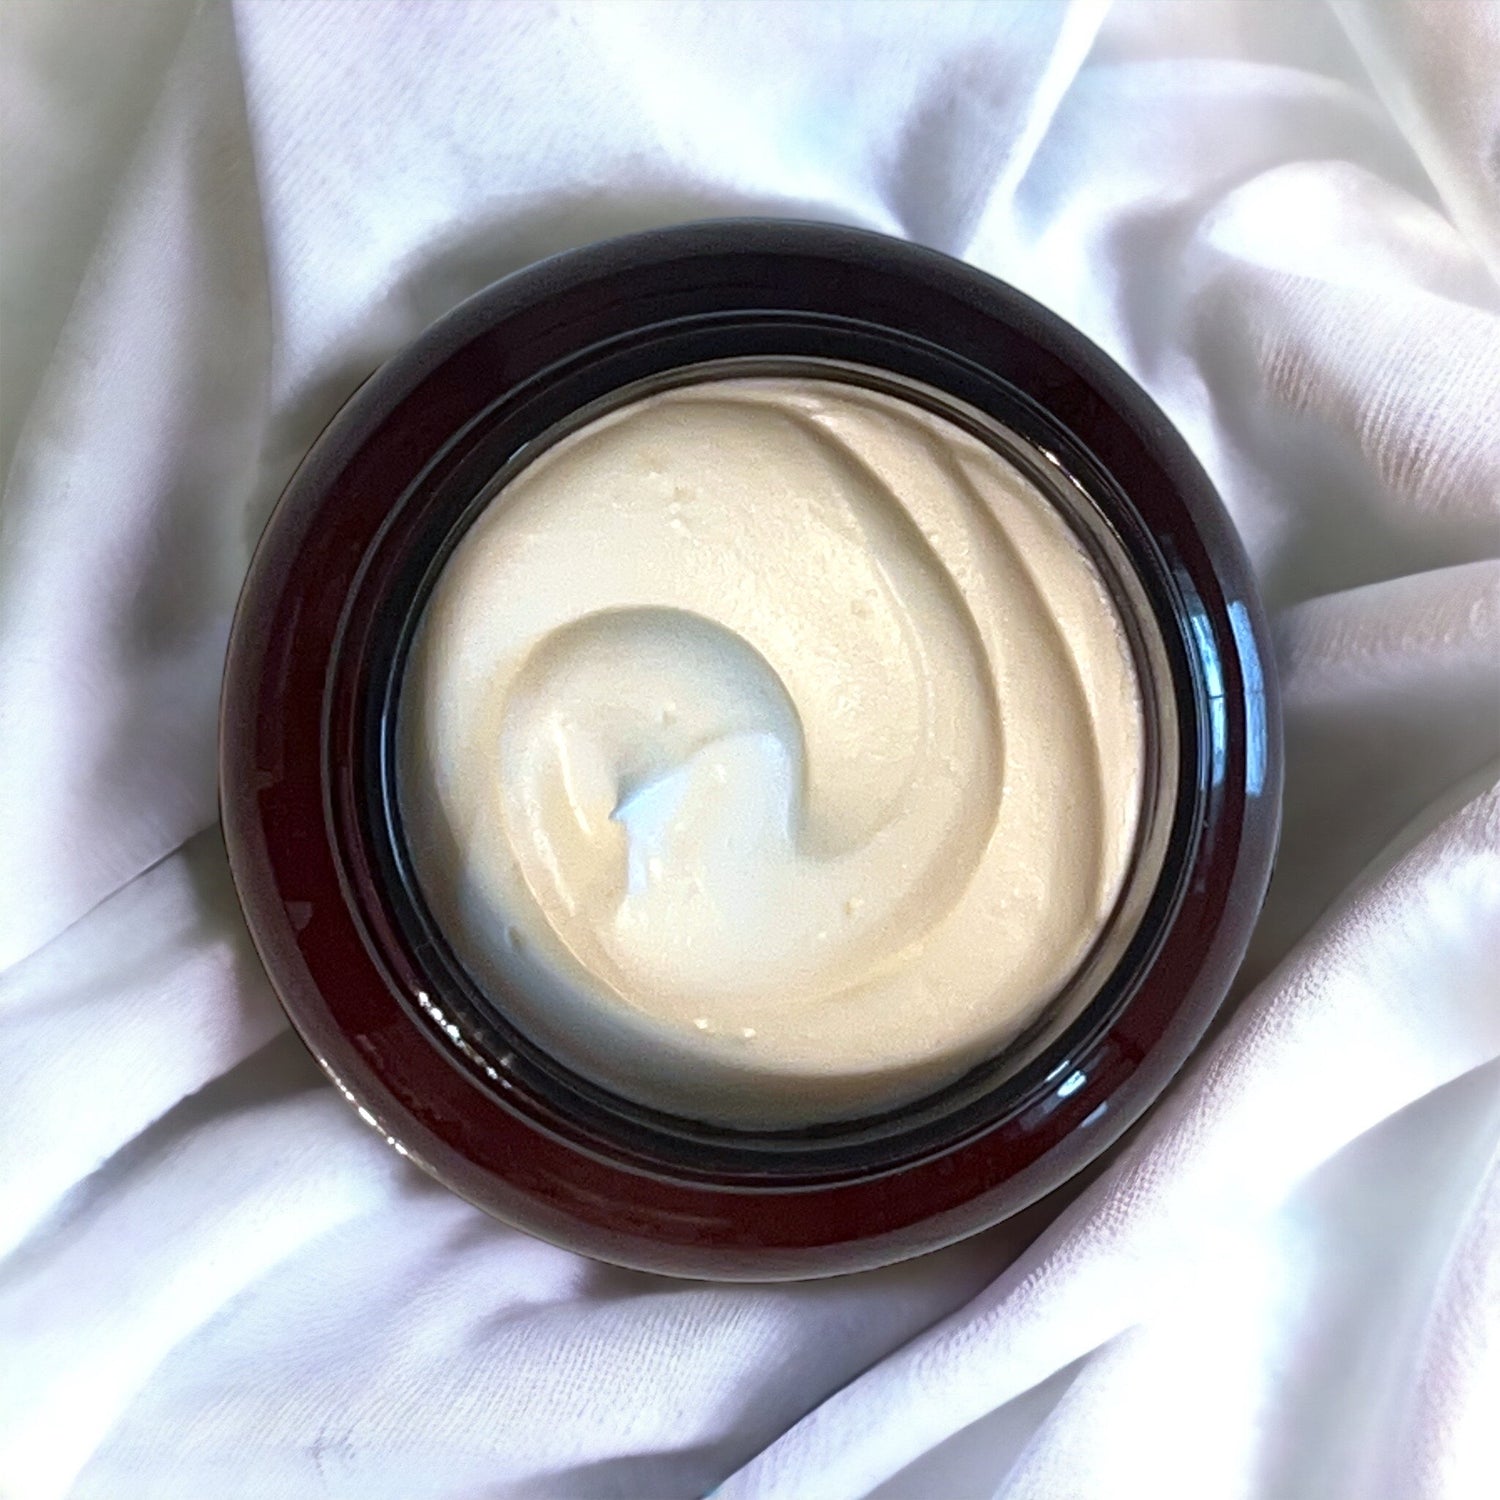 WHIPPED BODY BUTTERS